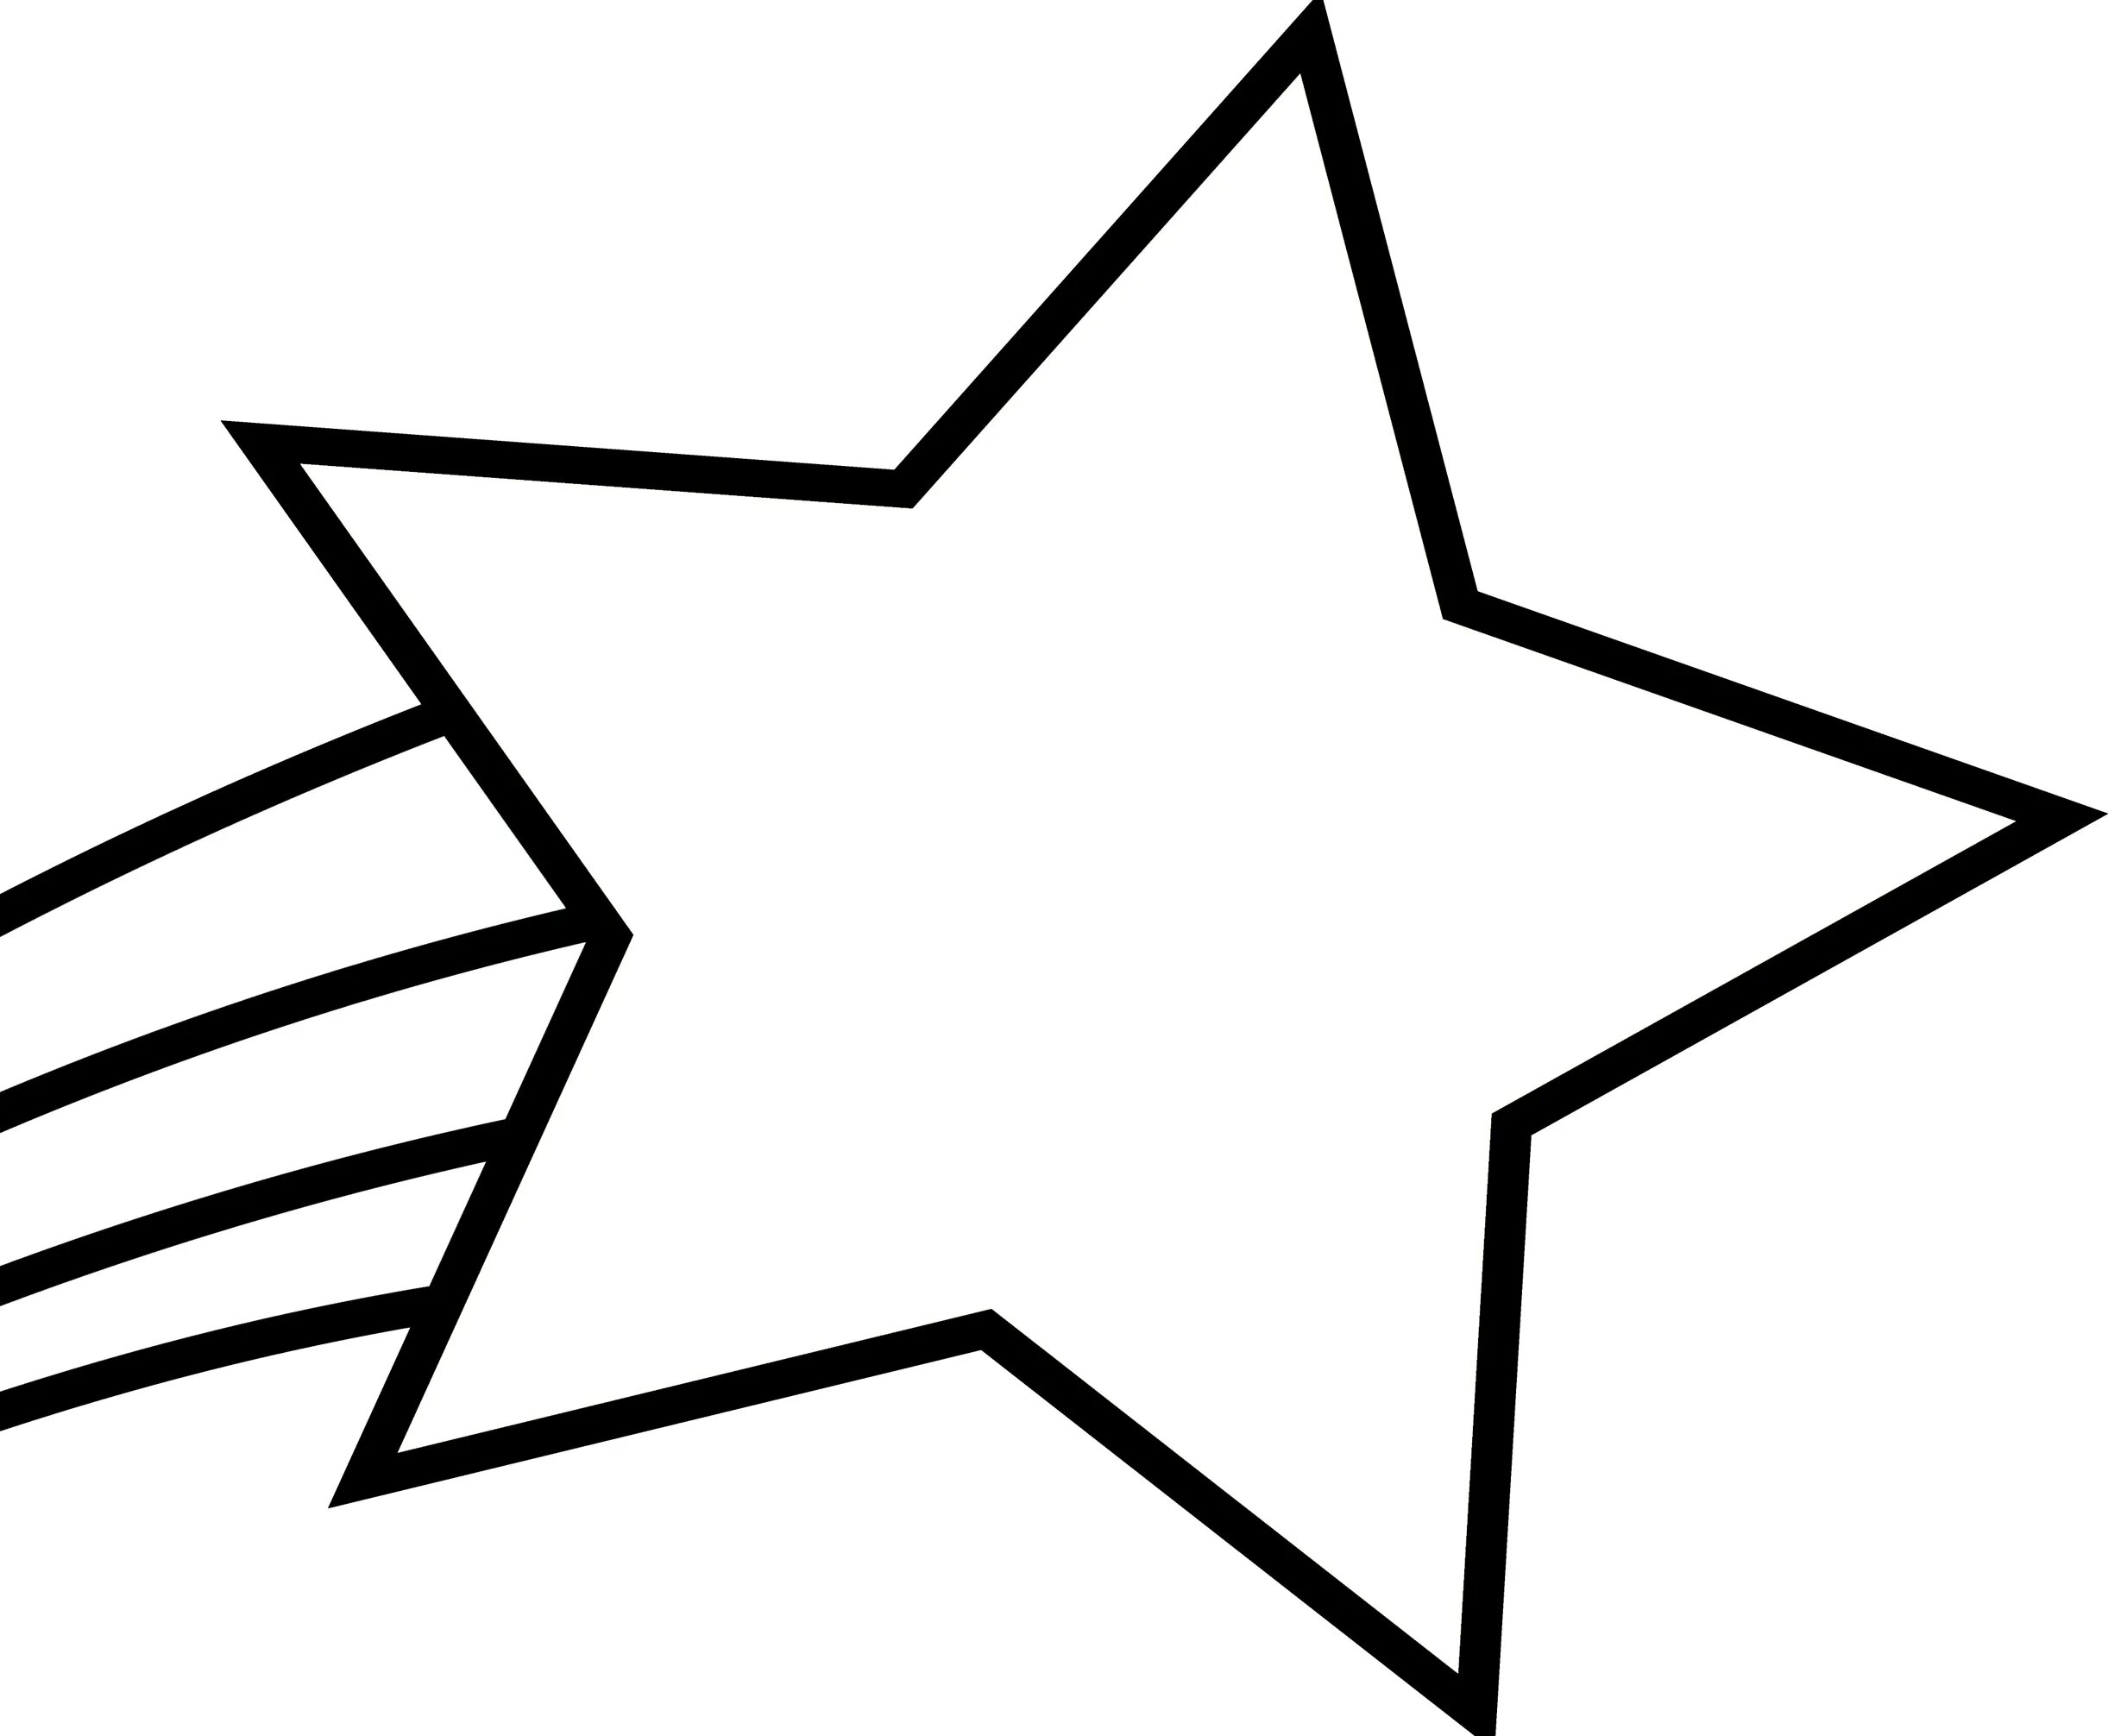 Coloring star with colorful splashes for preschoolers